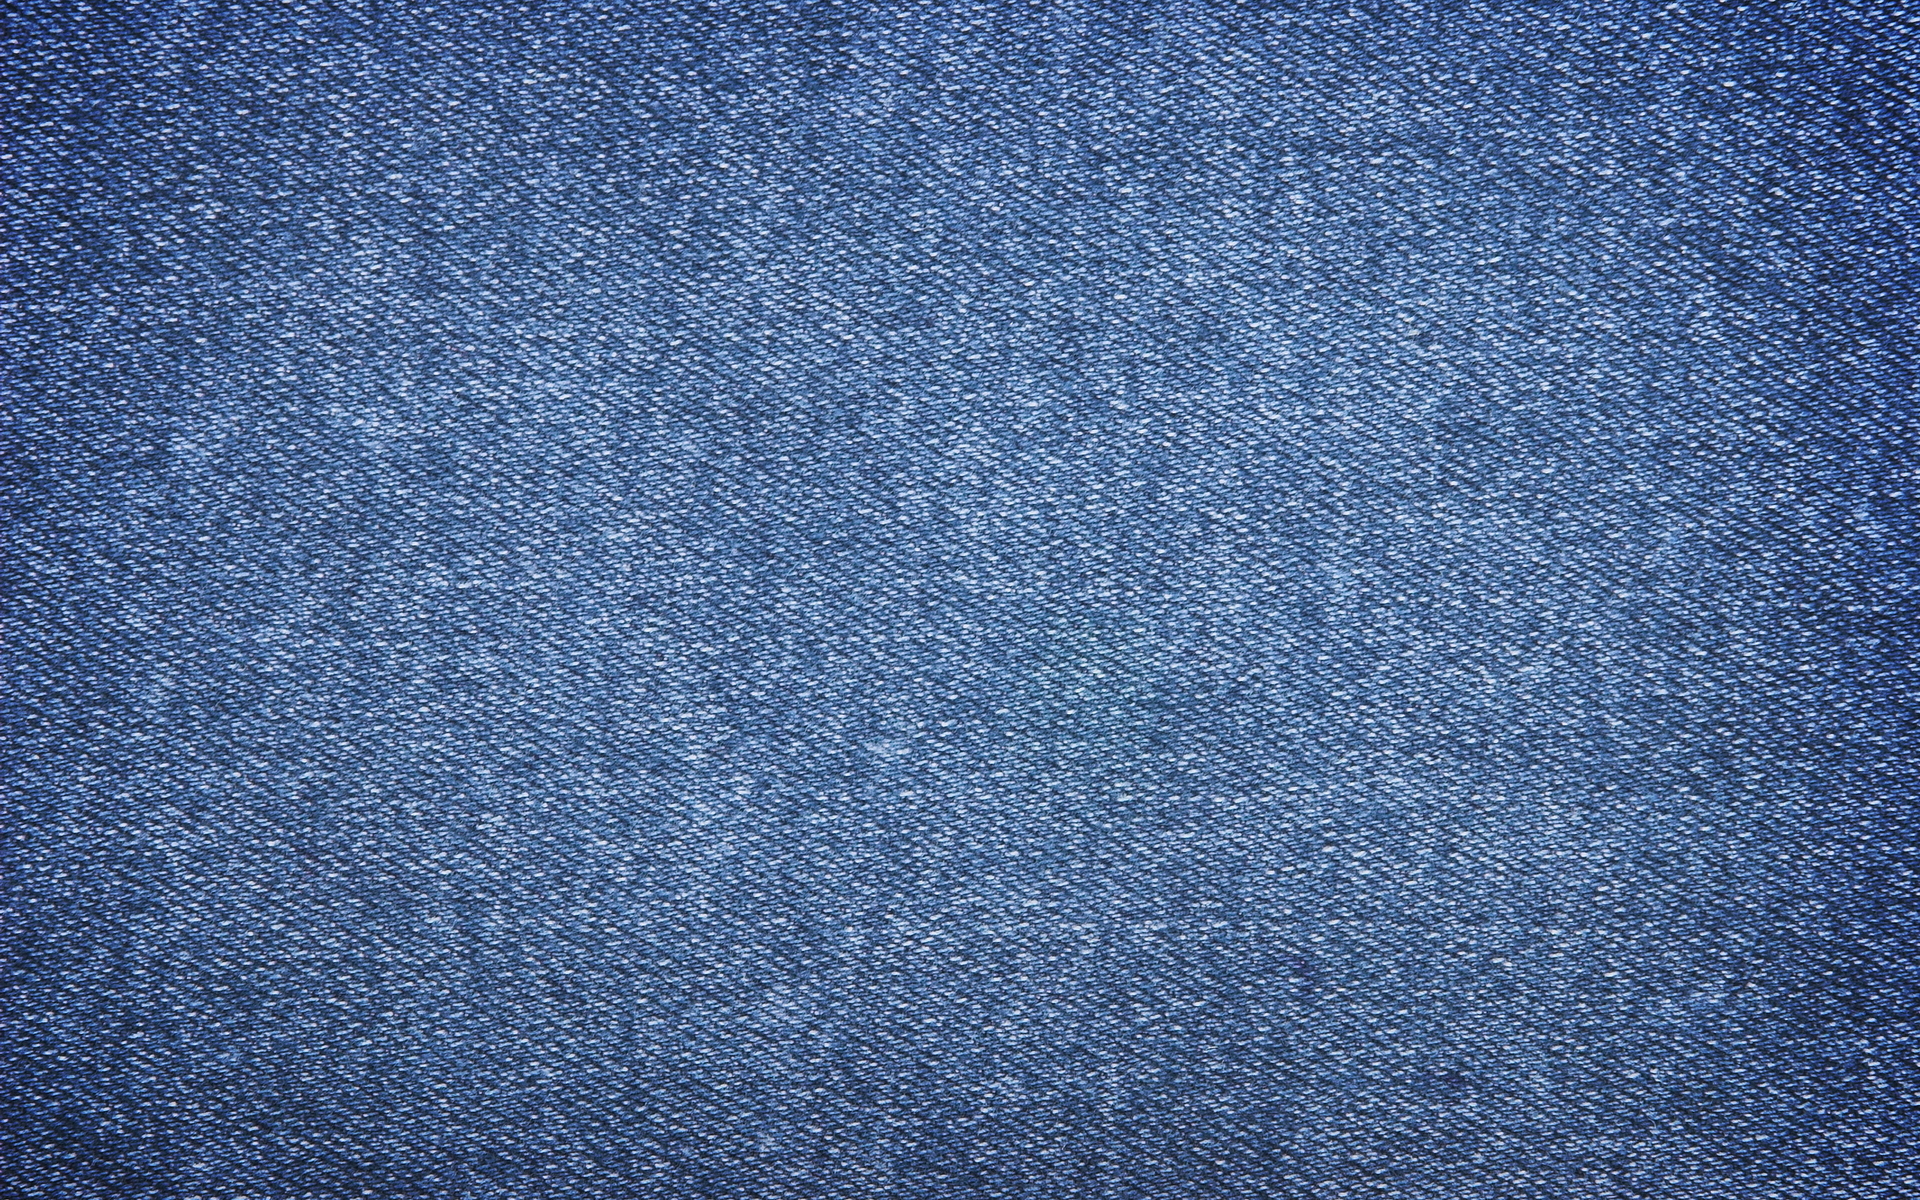 Texture Background Blue Jeans Fabric Material Jpg